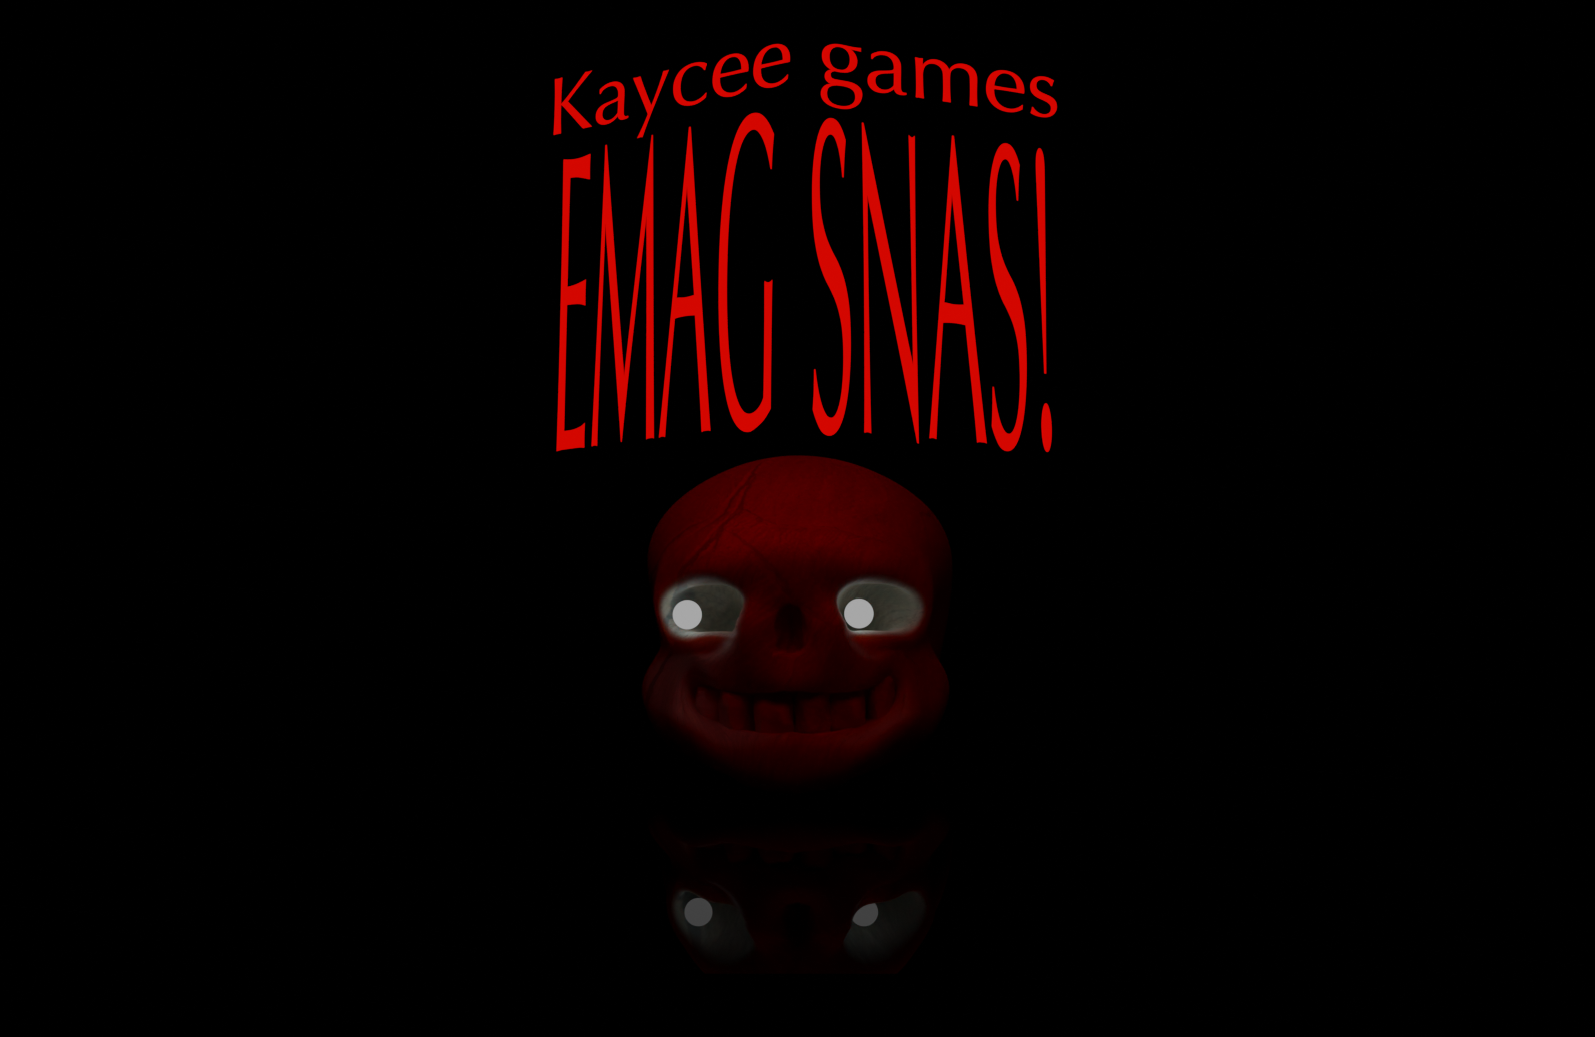 EMAG SNAS